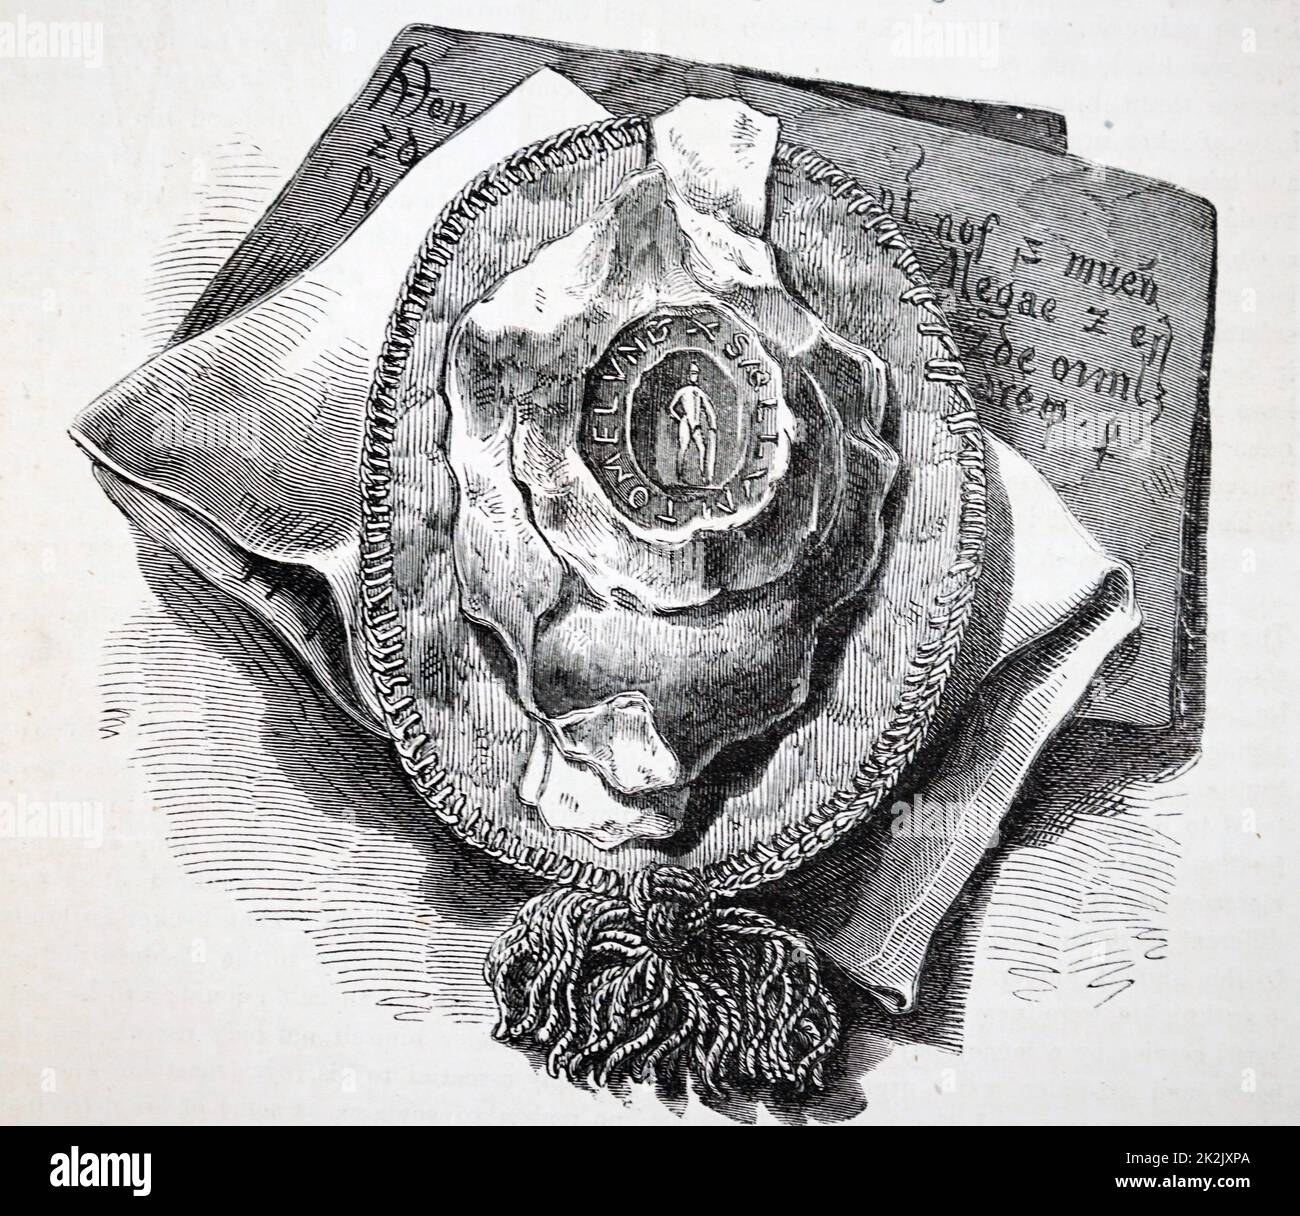 Engraving depicting the seal and bag preserved in the Record Office. Inside the bag is a grant made by Saint Thomas Becket (1118-1170) to the Priory of the Holy Trinity. Dated 12th Century Stock Photo